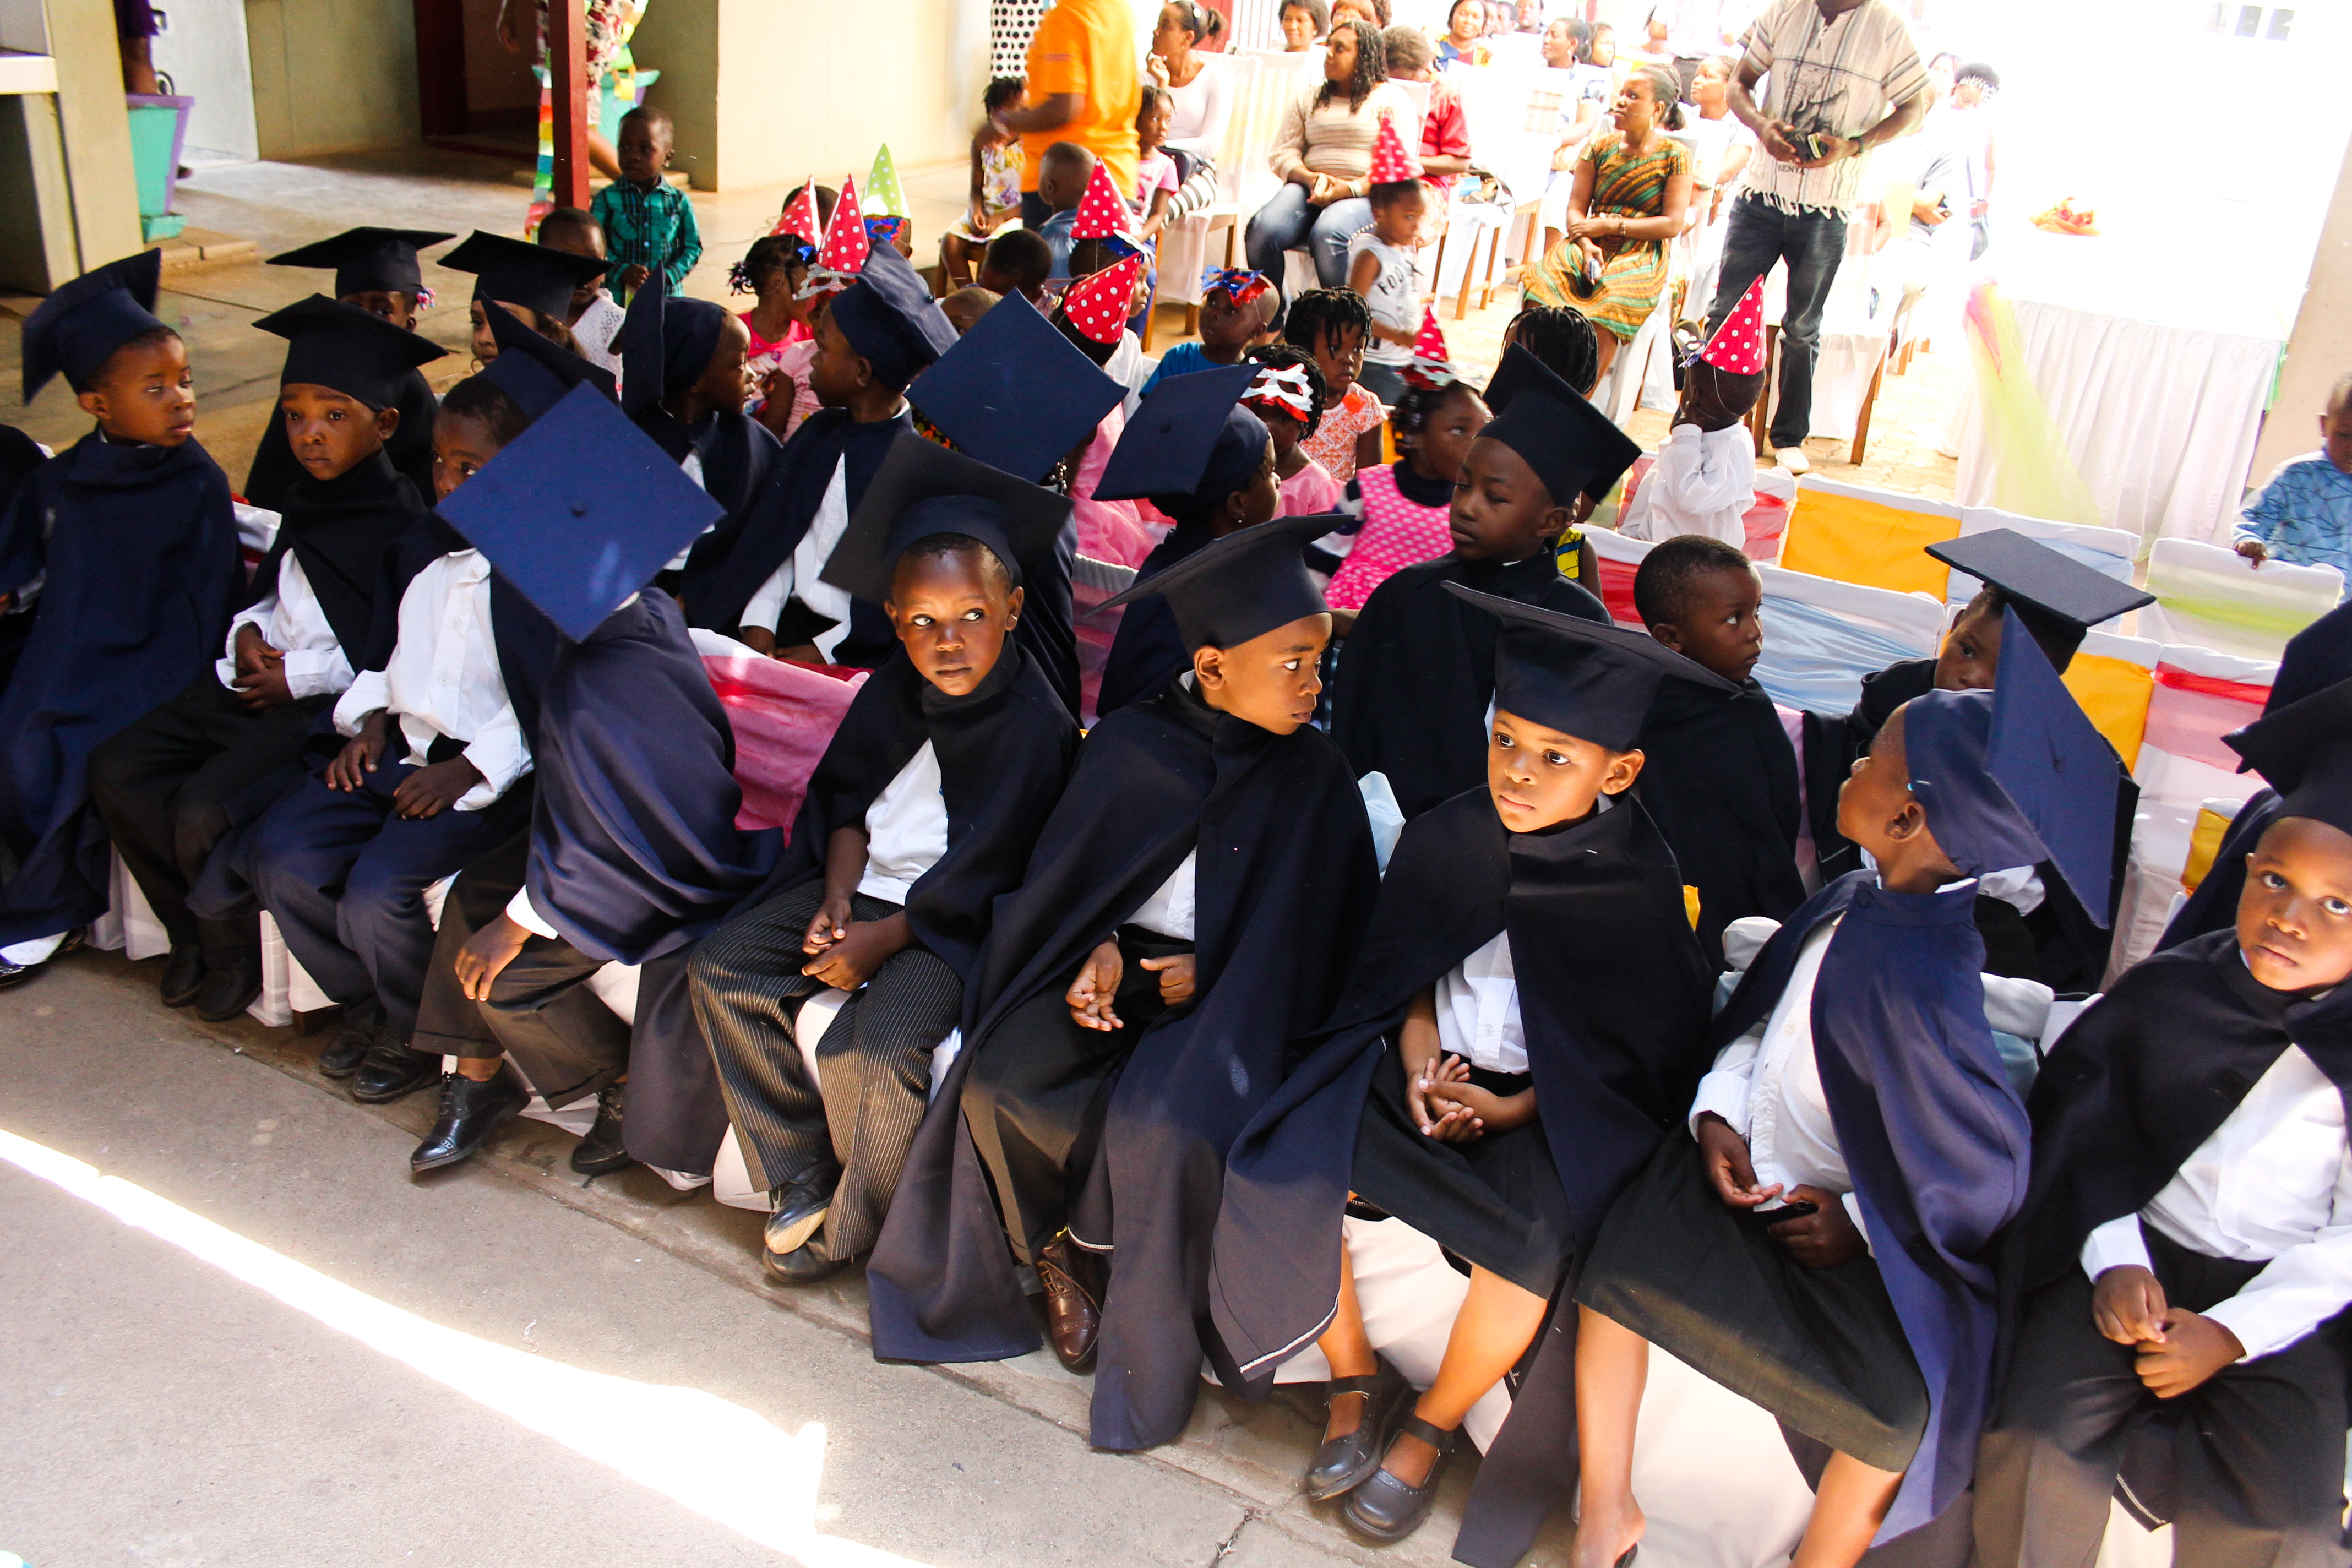 Graduation day at one of the SOS-Kindergartens in Mozambique.